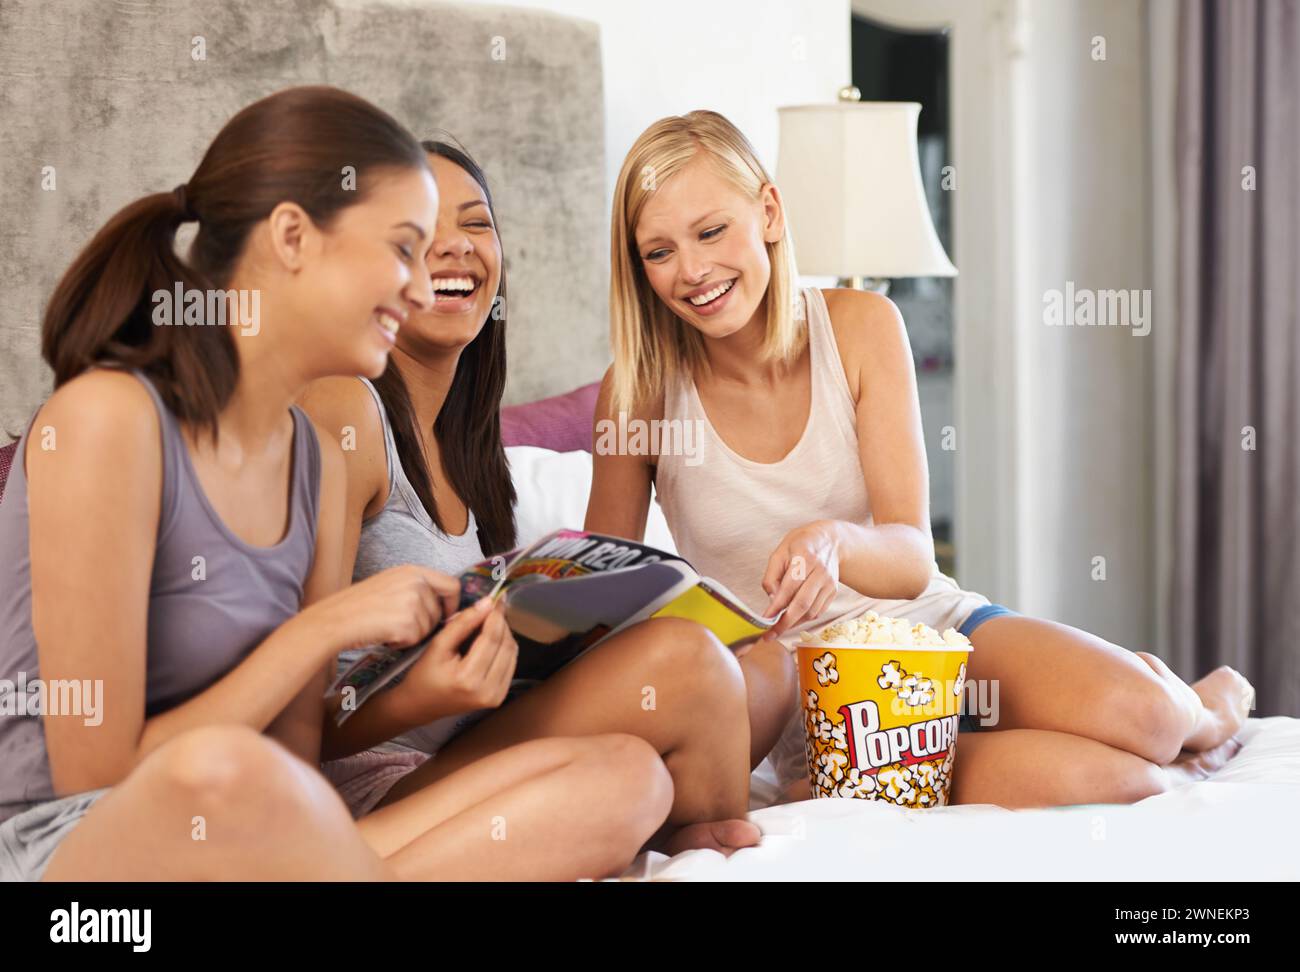 Friends, popcorn and reading magazine on bed with laughing, discussion and girls night in home with pyjamas. Women, snack and happiness with paper in Stock Photo